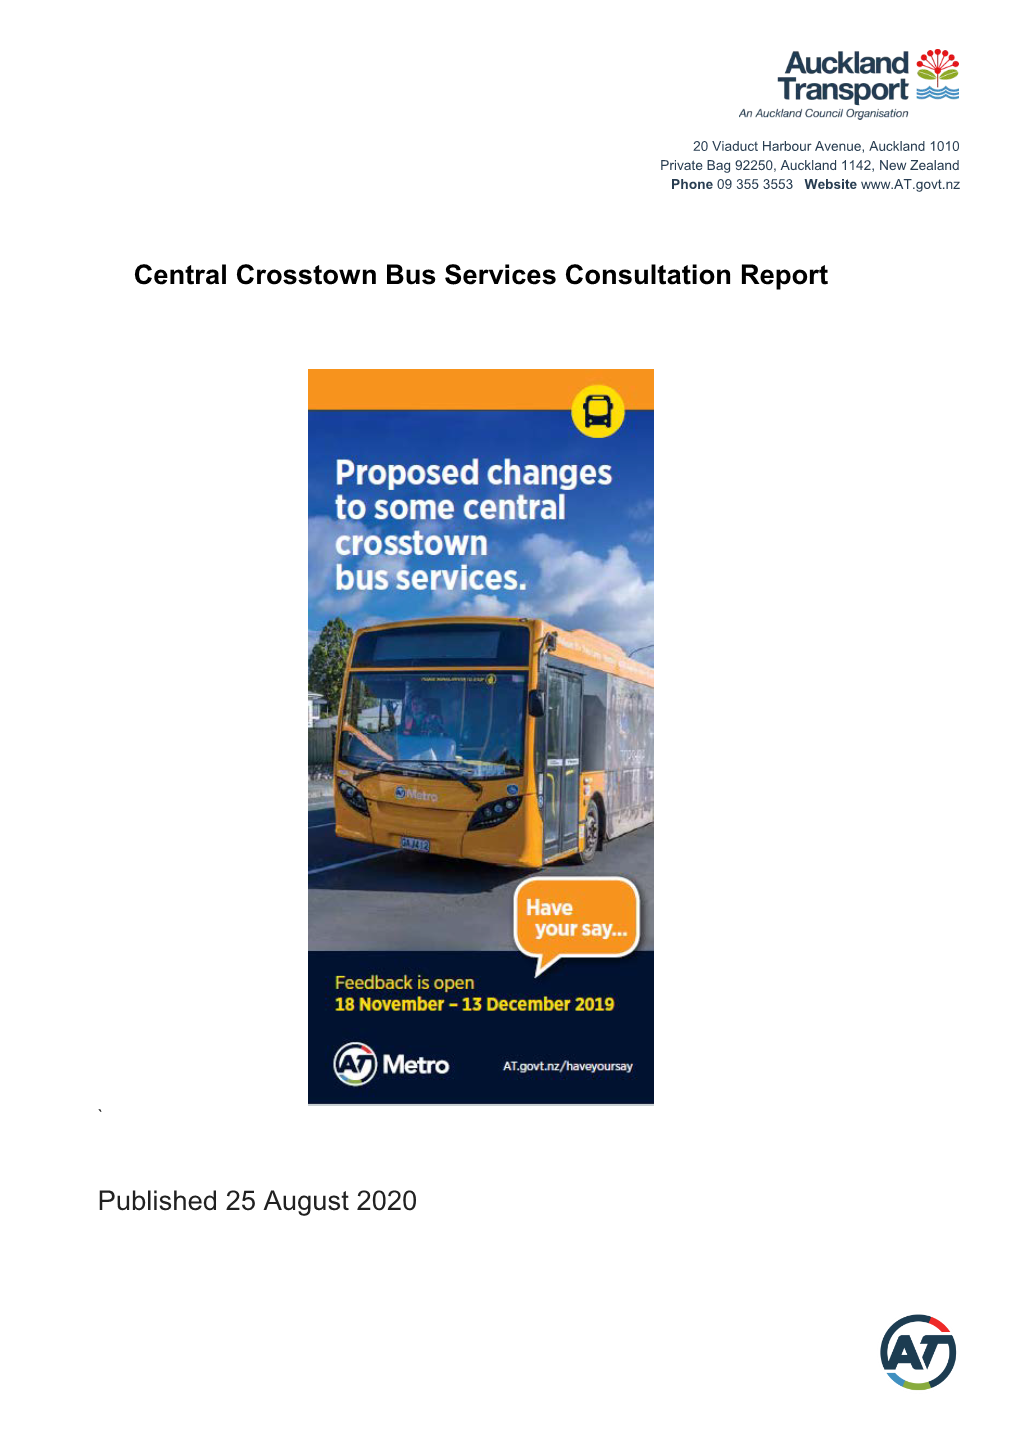 Central Crosstown Bus Services Consultation Report Published 25